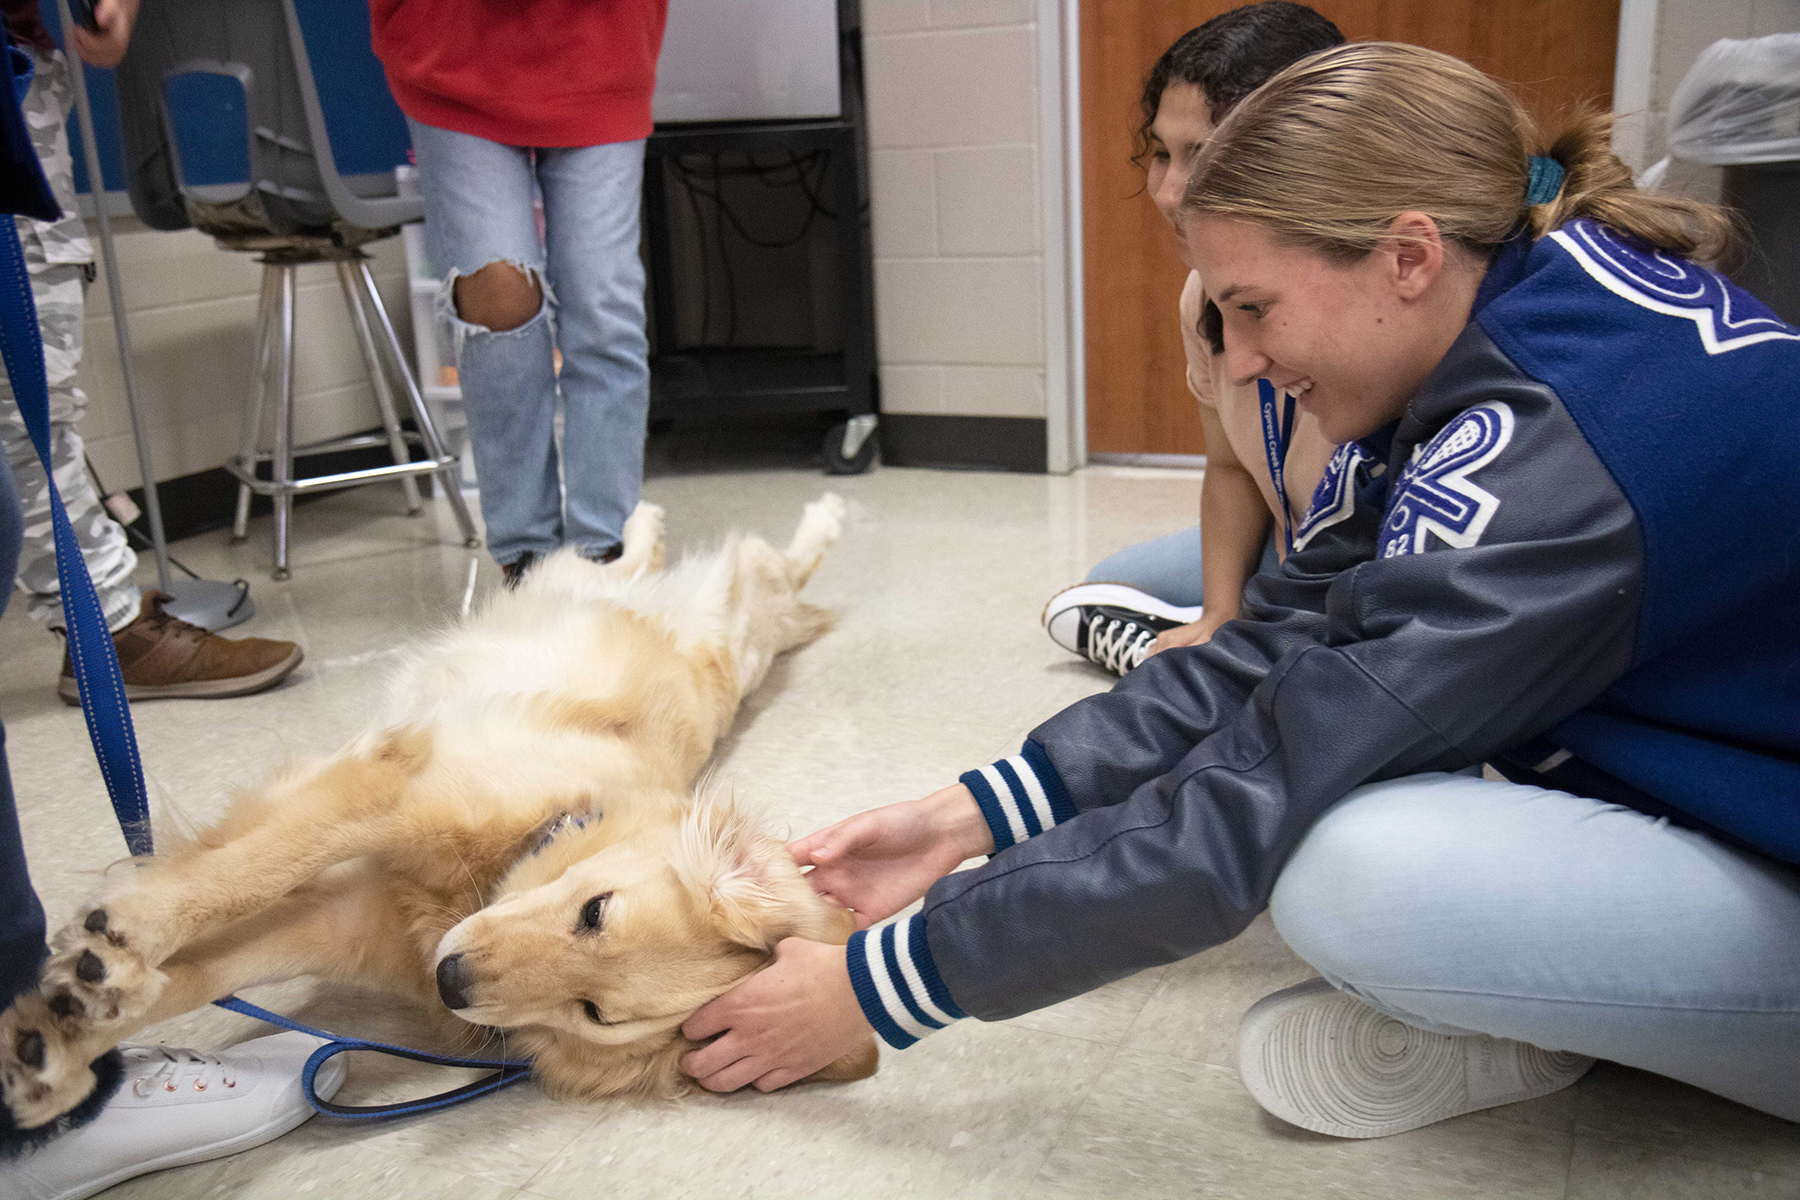 Cypress Creek HS Welcomes Comfort Dog to Campus